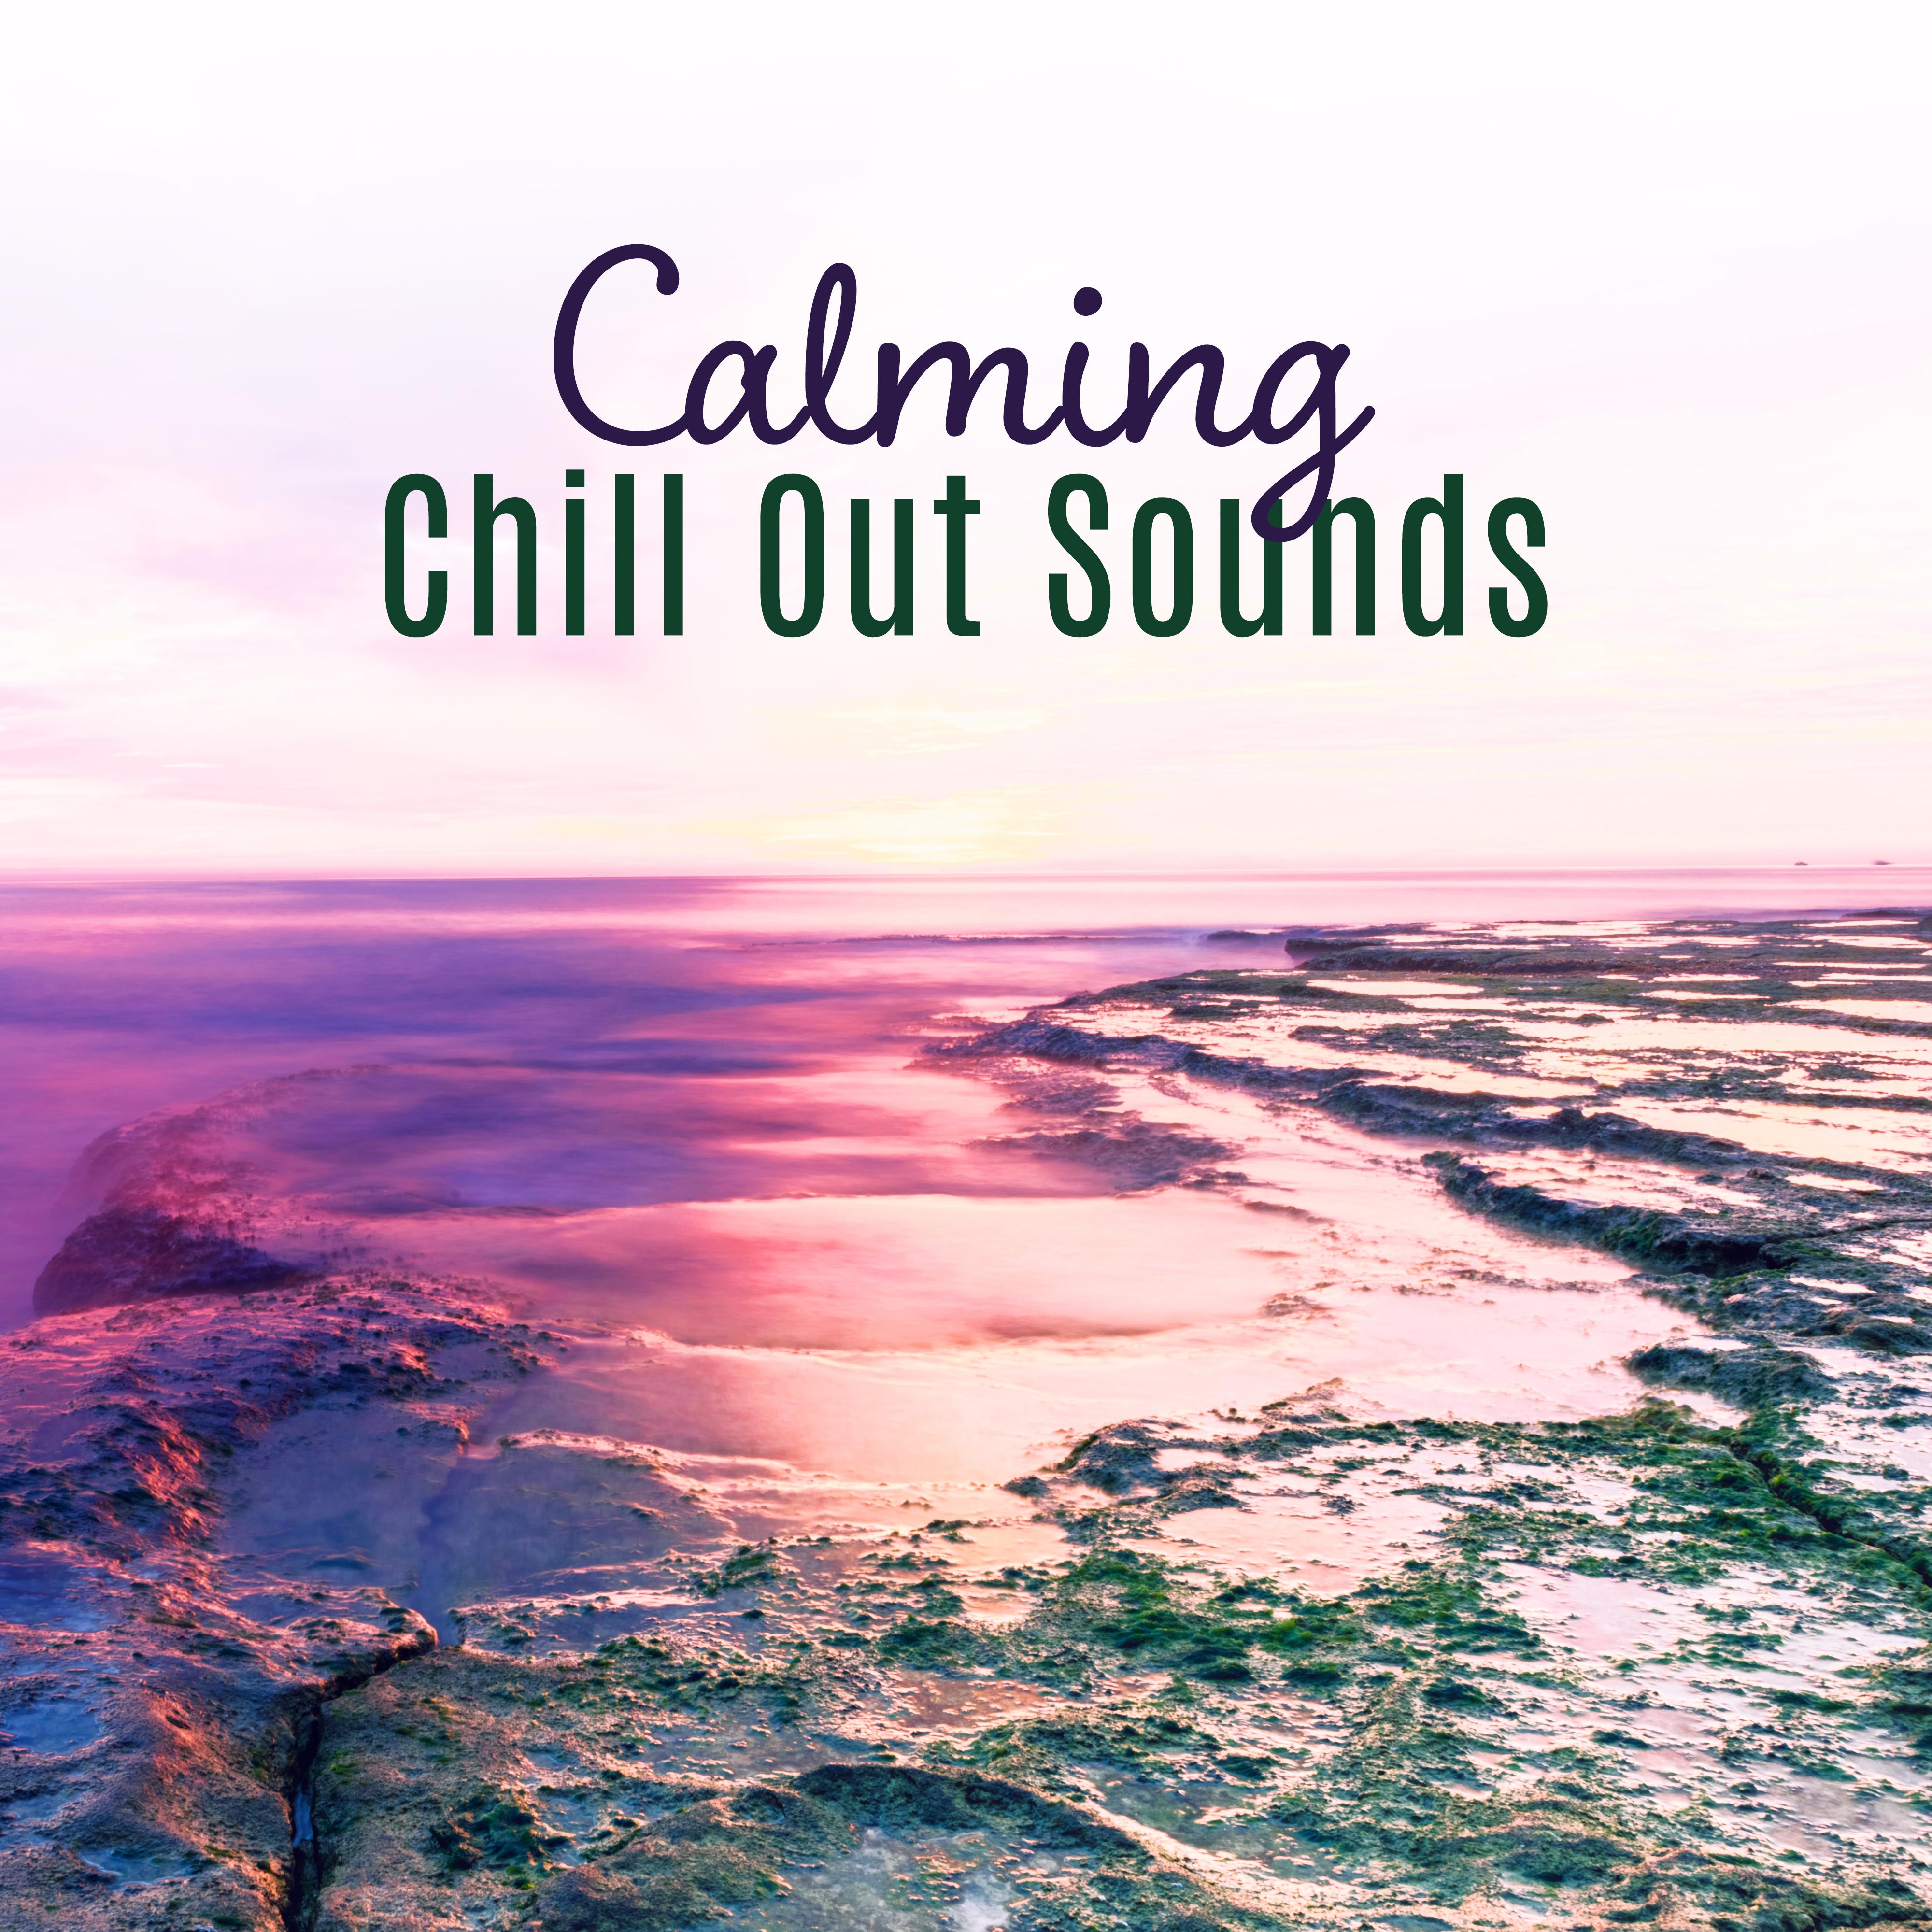 Calming Chill Out Sounds – Stress Relief, Music to Calm Down, Peaceful Waves, Summer 2017